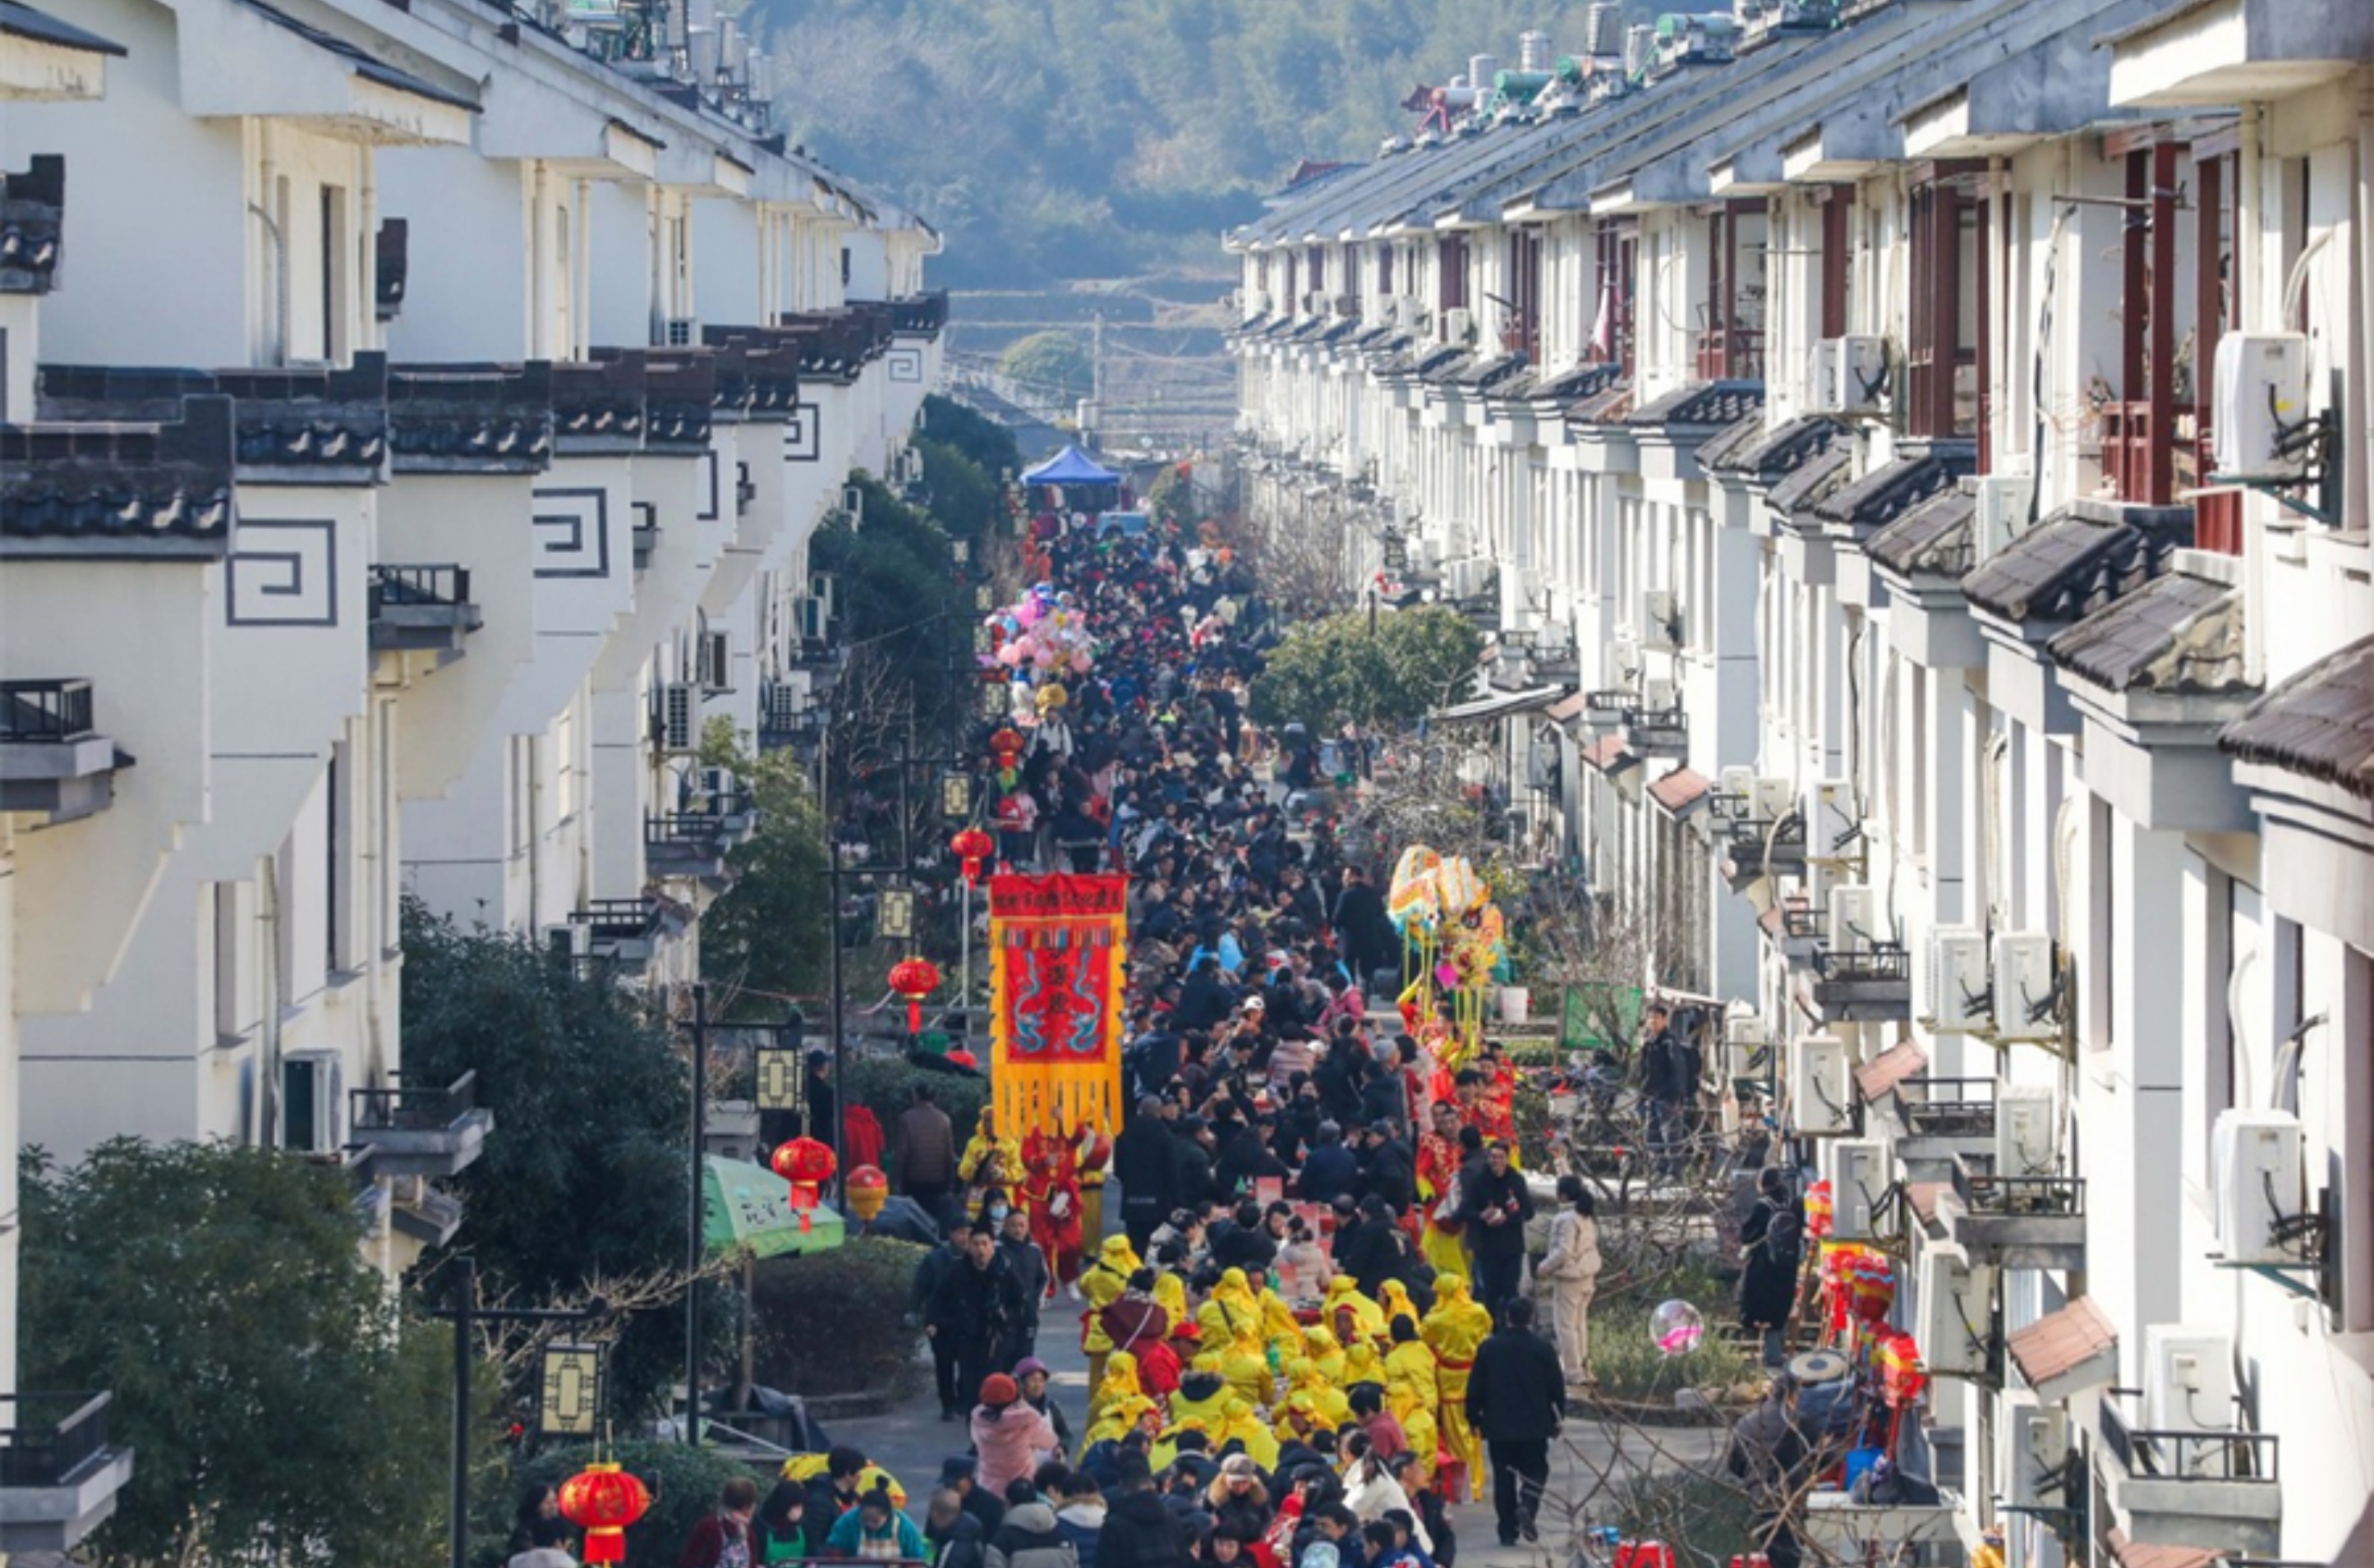 Folk activities add color to Spring Festival